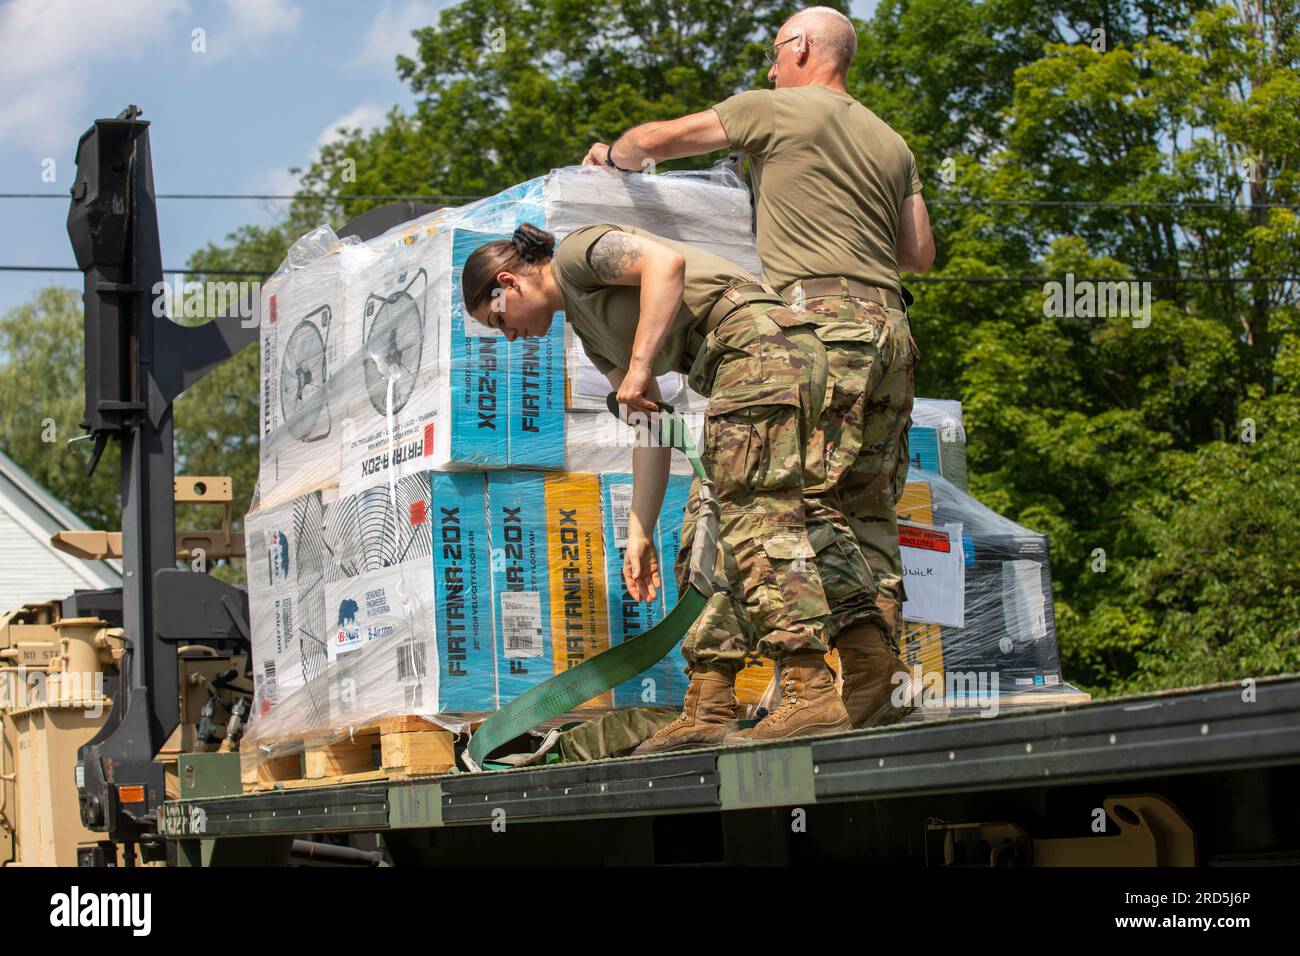 Hardwick, United States Of America. 17th July, 2023. Hardwick, United States of America. 17 July, 2023. U.S. Army Spc. Taylor LaRocque, left, and Staff Sgt. Emil Lemay, right, with the Vermont Army National Guard unload donated electric fans in the aftermath of floods, July 17, 2023 in Hardwick, Vermont. Soldiers helped organize and distribute donated items to towns affected by flooding across Vermont. Credit: Sgt. Denis Nunez/U.S. Army Photo/Alamy Live News Stock Photo